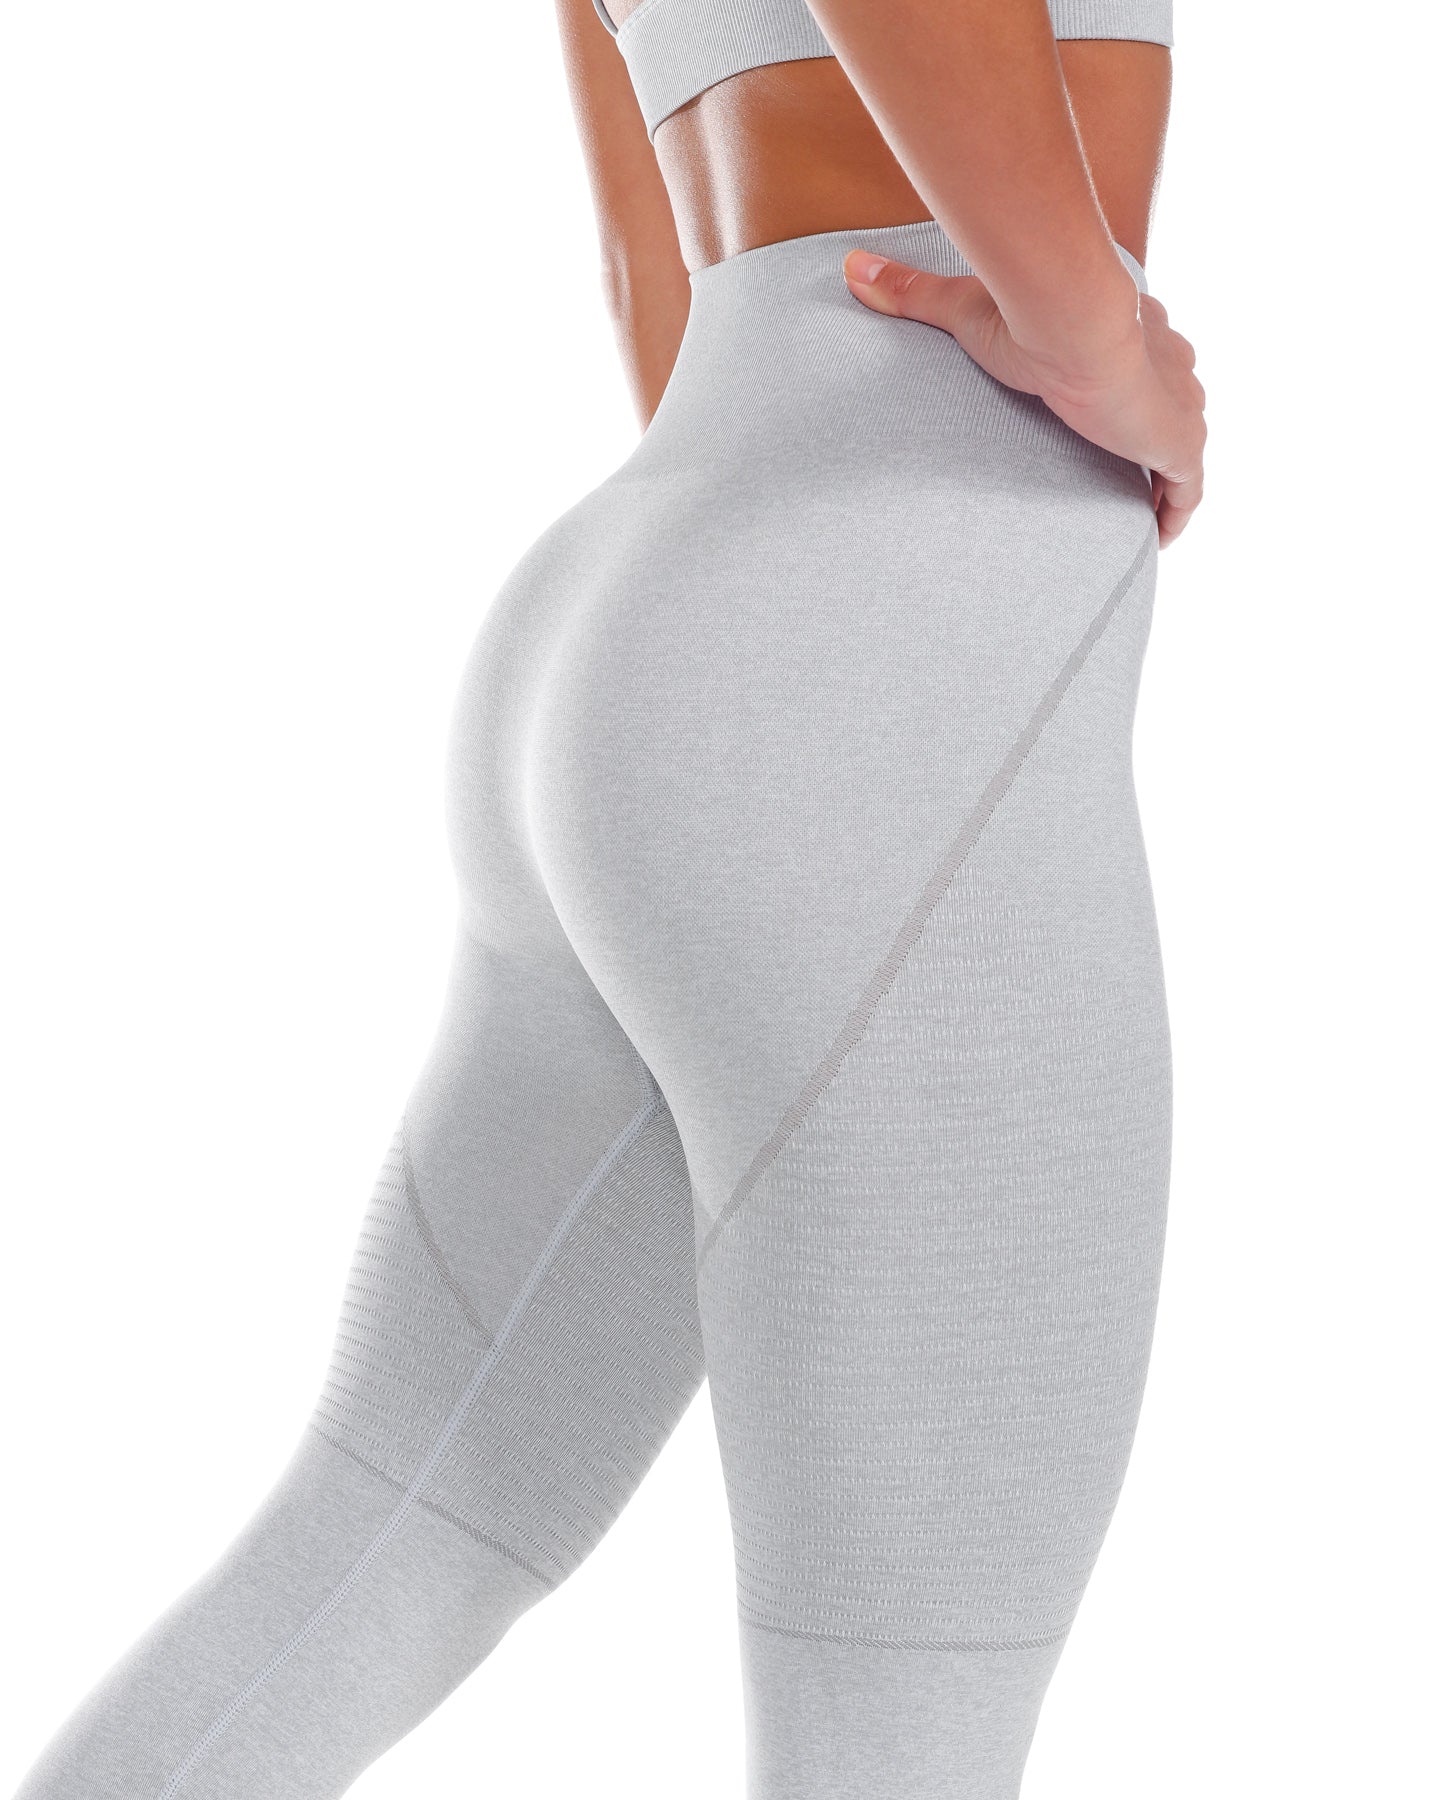 CONTOUR 7/8 Leggings / Light Grey Marl – A-Fitsters